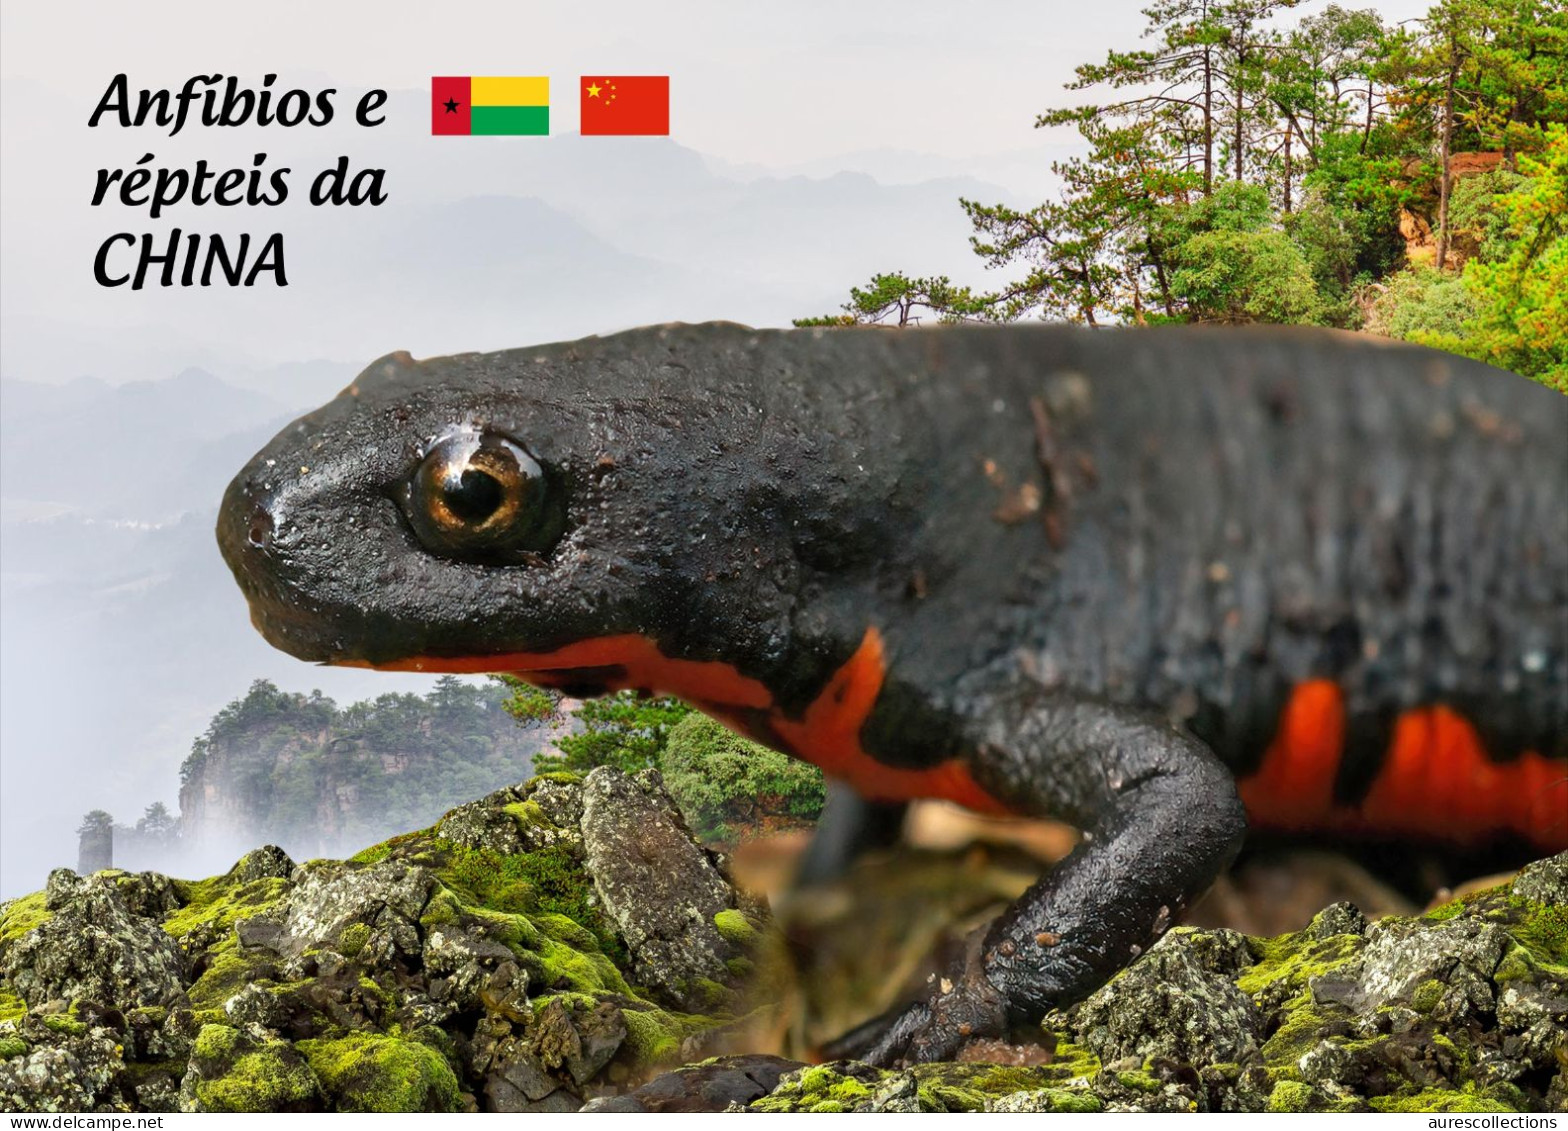 GUINEA BISSAU 2024 STATIONERY CARD 6V - CHINA AMPHIBIANS & REPTILES FROG FROGS TURTLE TURTLES SNAKES CROCODILE NEWT - Rane